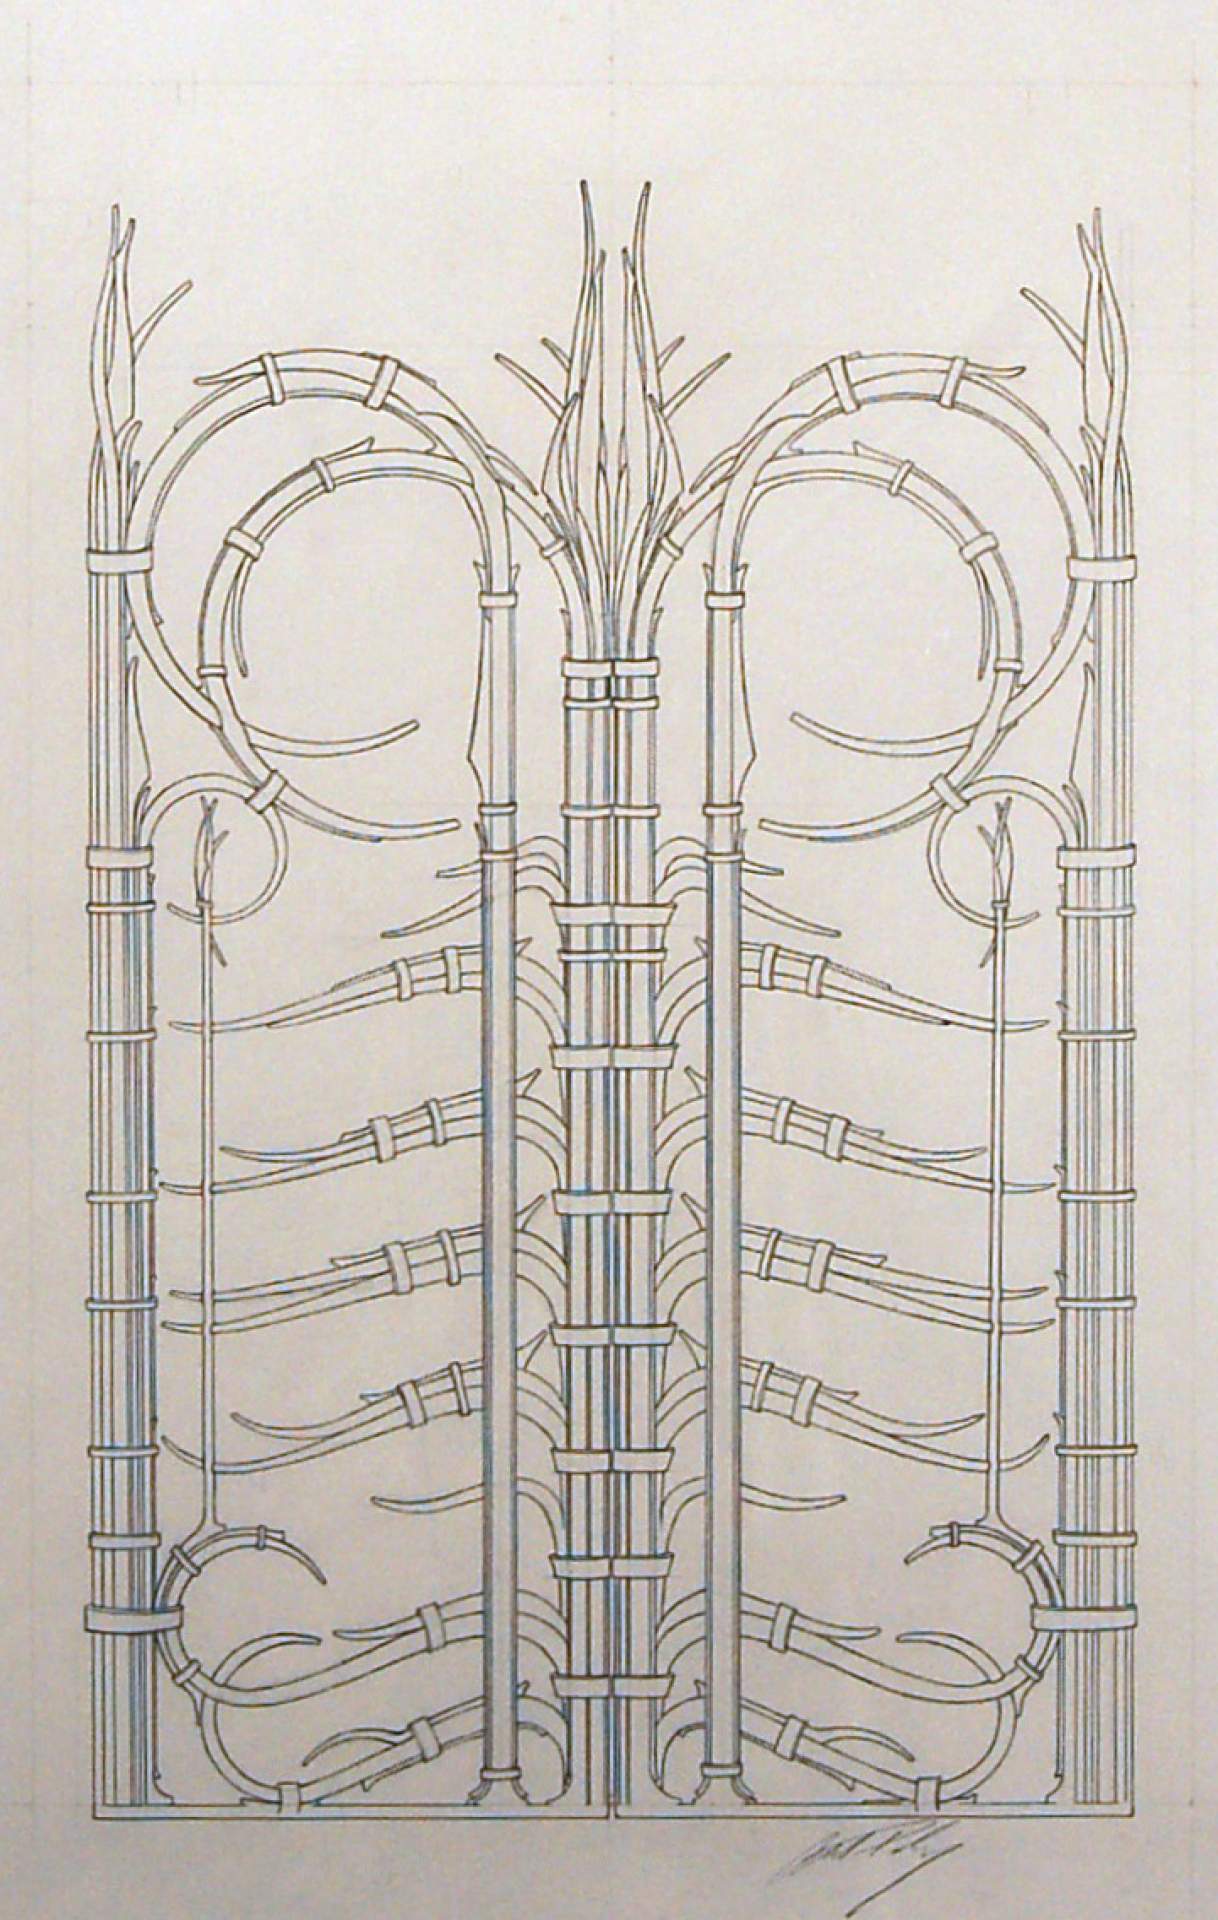 Proposal for Portal Gate for New York State Senate, New York State Capital Building, Albany, New York, Final Presentation, 1977